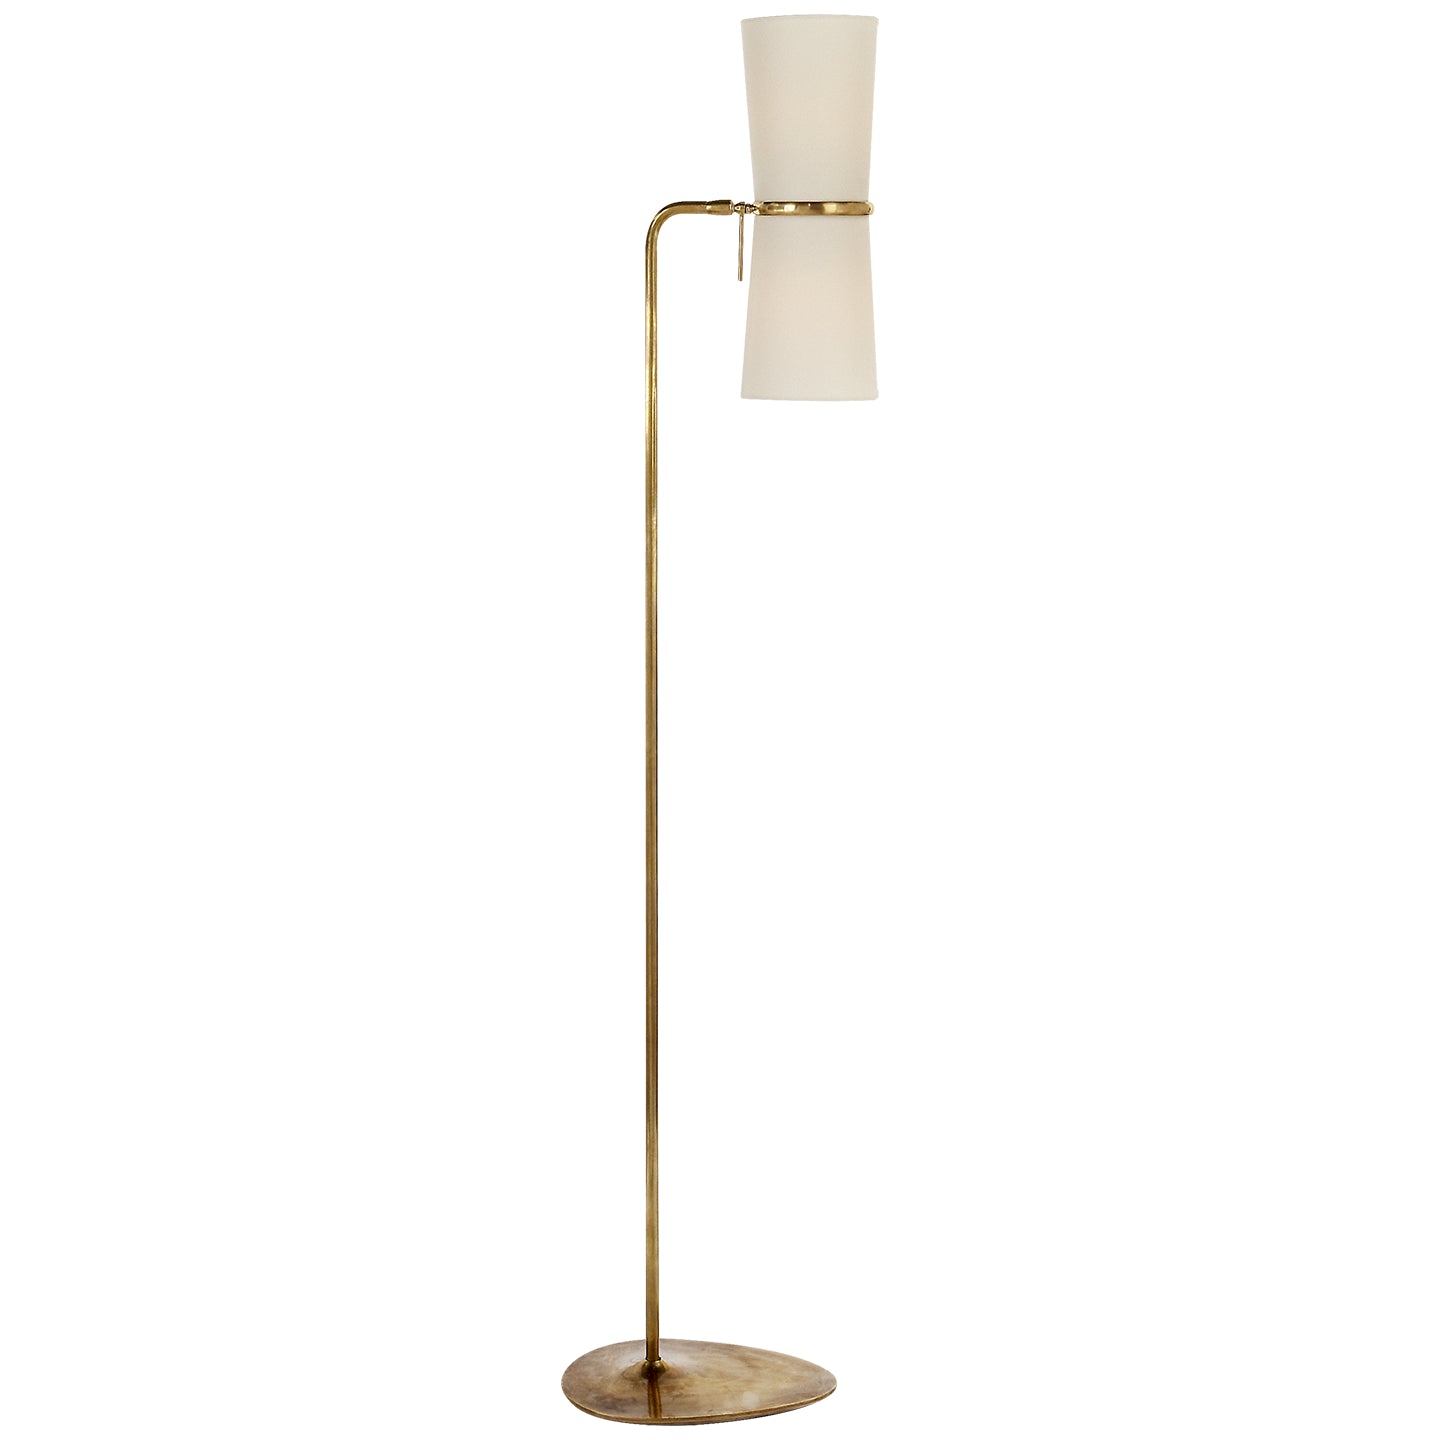 Visual Comfort Signature - ARN 1003HAB-L - Two Light Floor Lamp - Clarkson - Hand-Rubbed Antique Brass